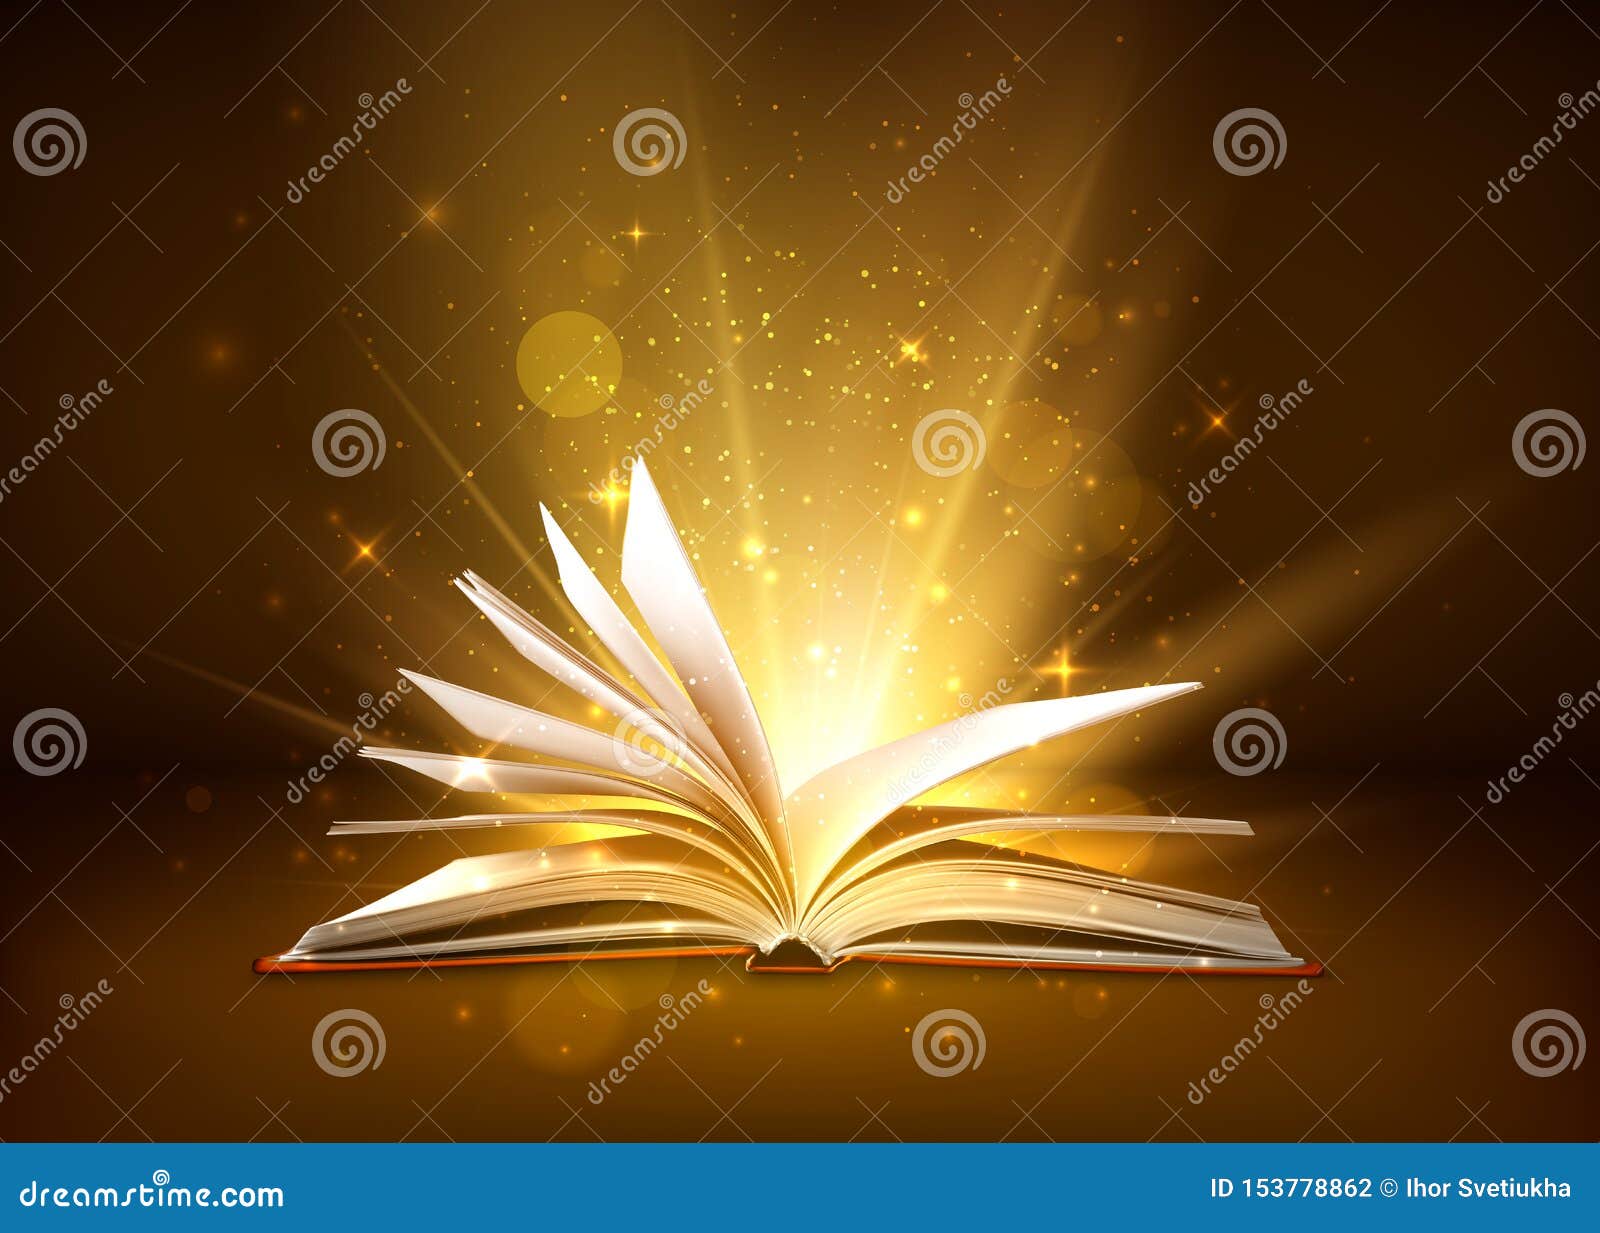 mystery open book with shining pages. fantasy book with magic light sparkles and stars.  